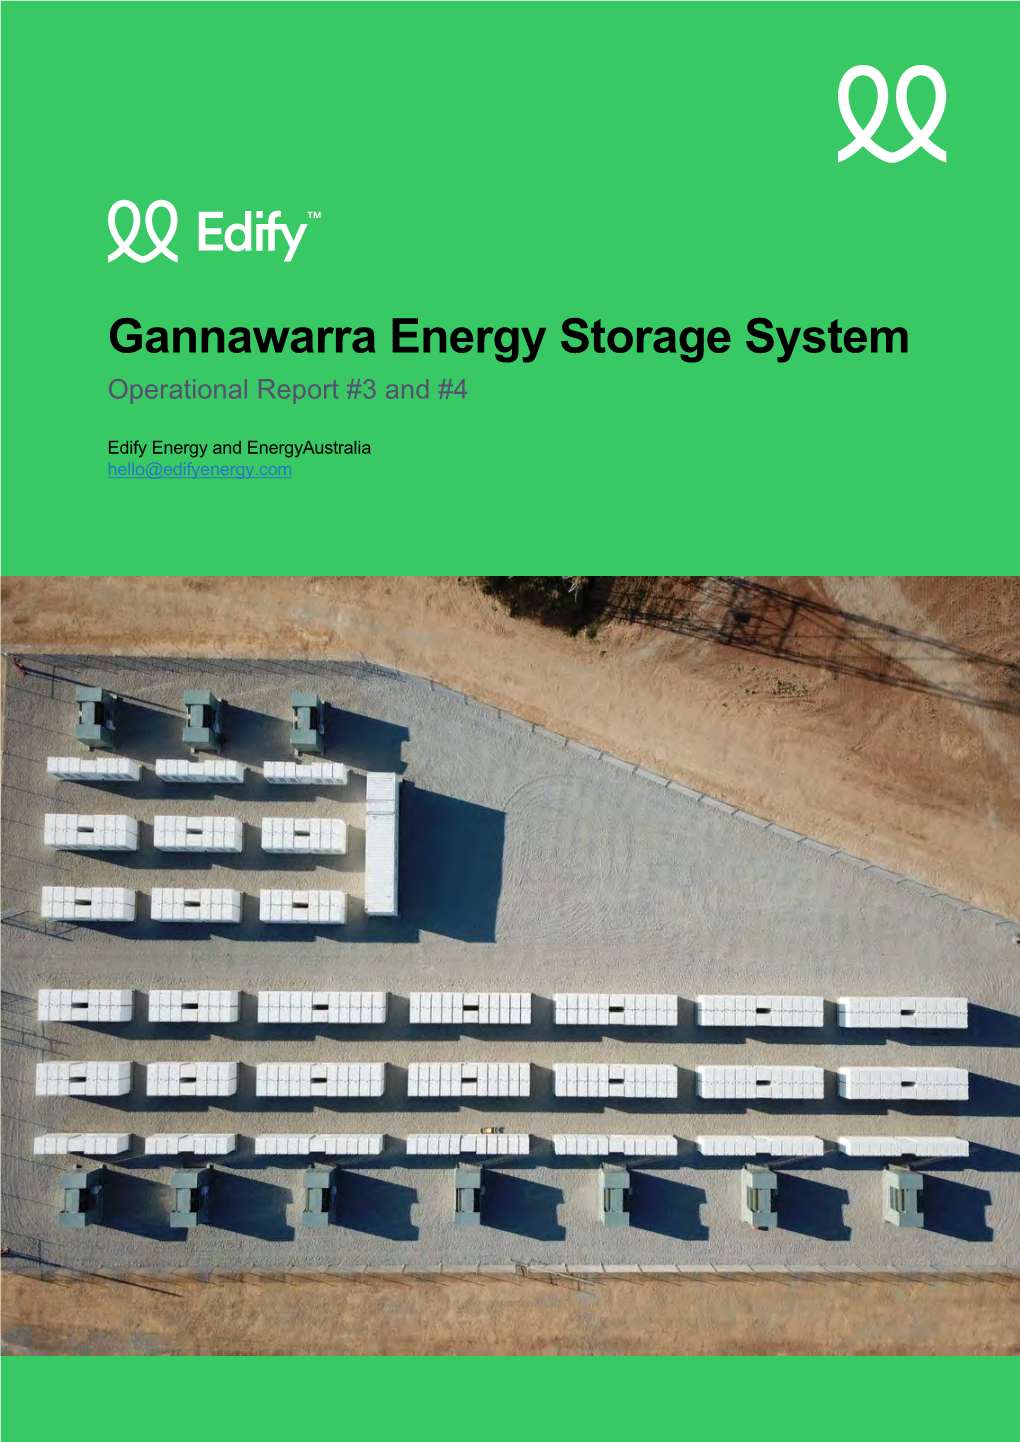 Gannawarra Energy Storage System Operational Report #3 and #4